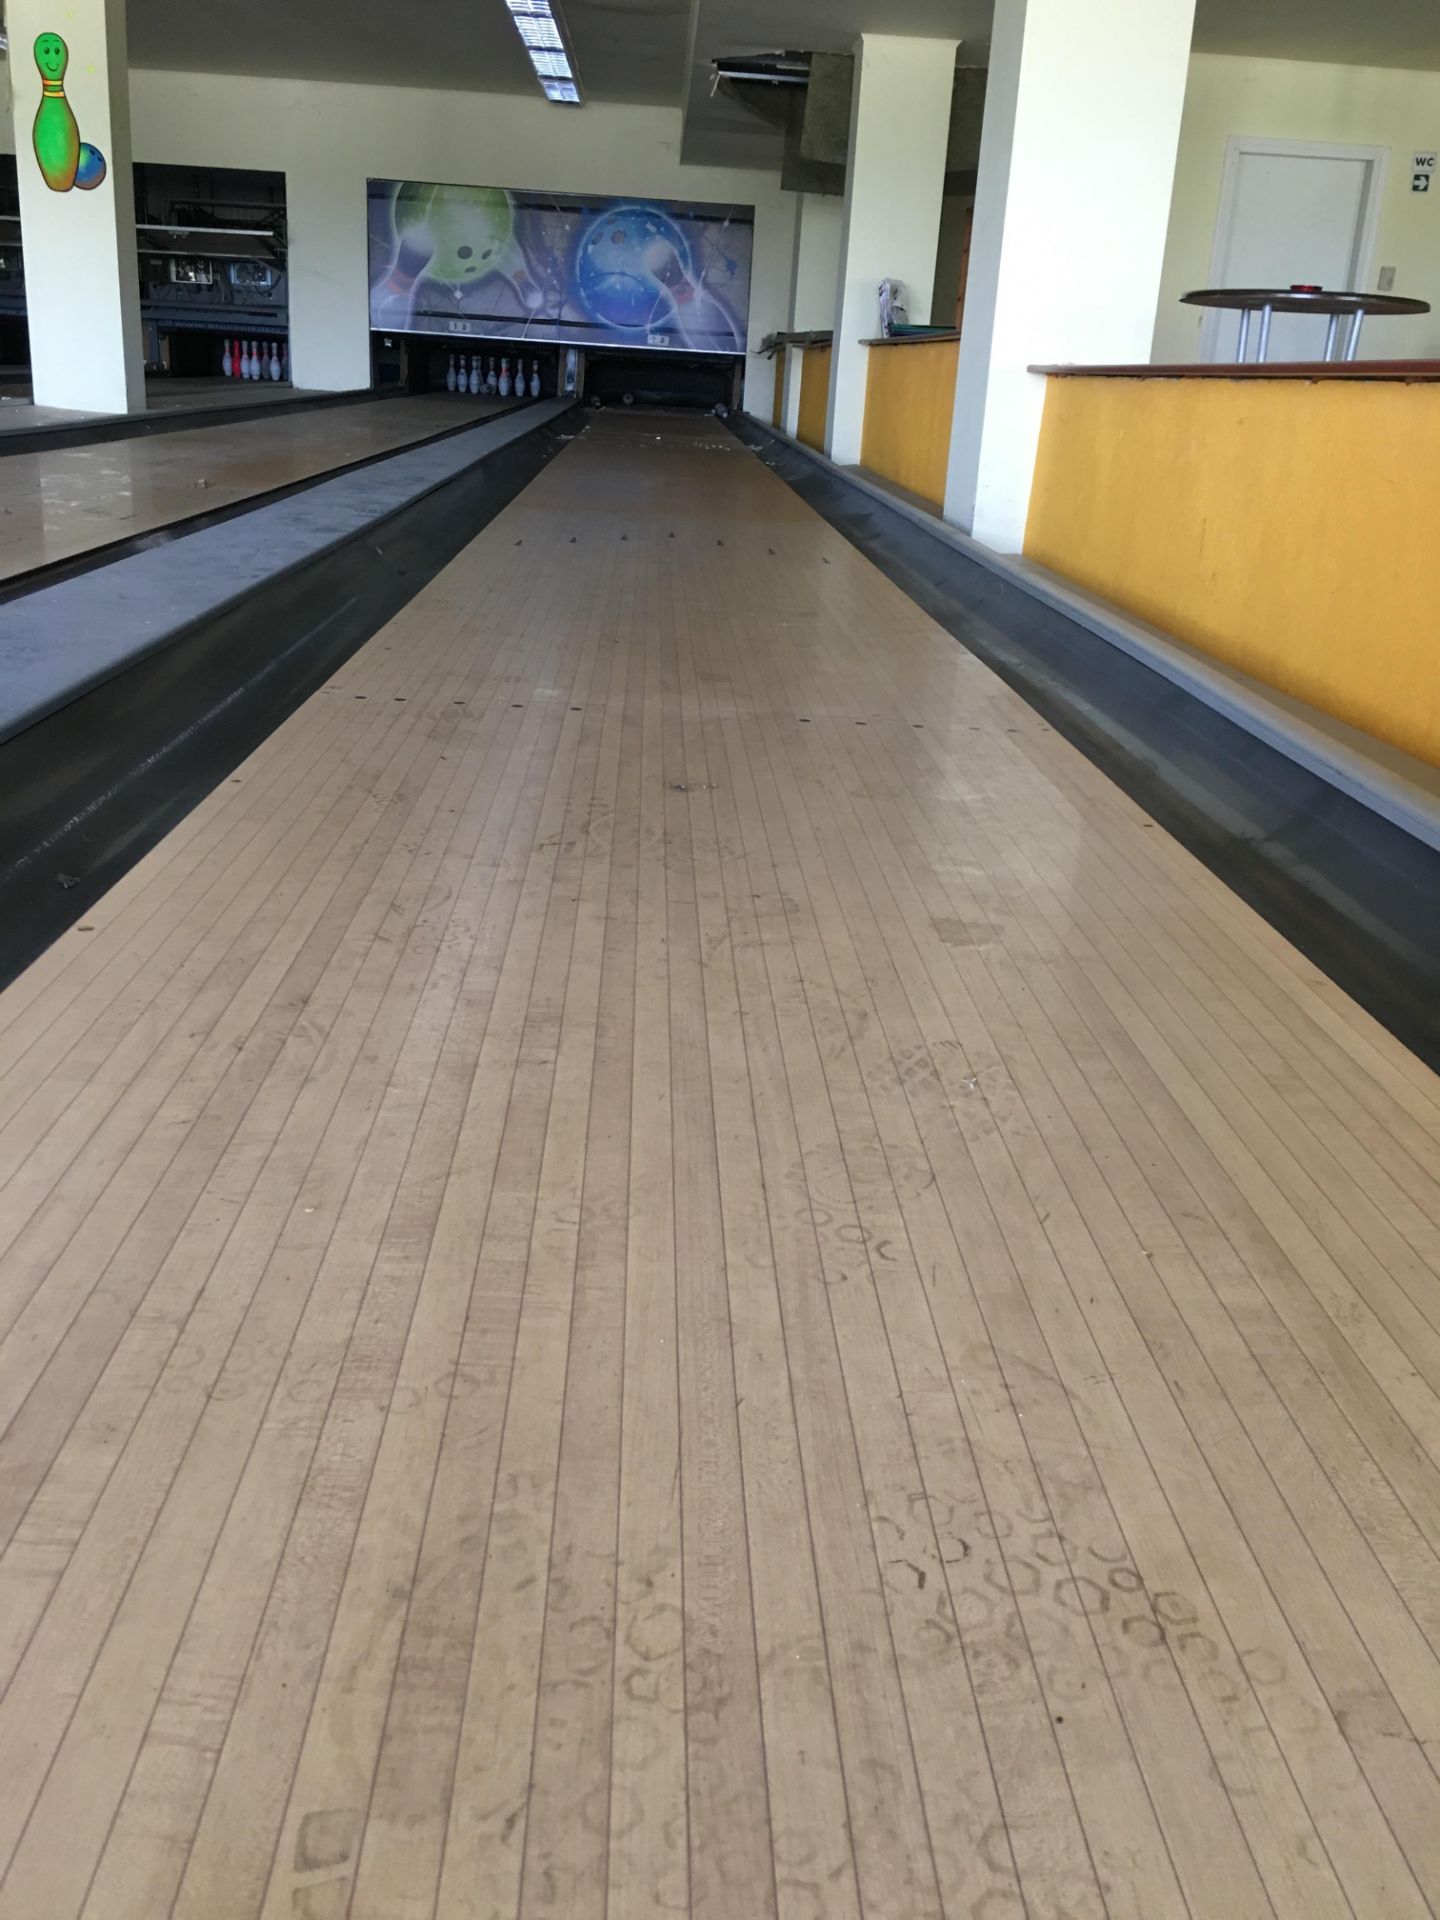 Complete Bowling Facility 4 Lanes Brunswick ( Building Not for Sale) - Image 33 of 86